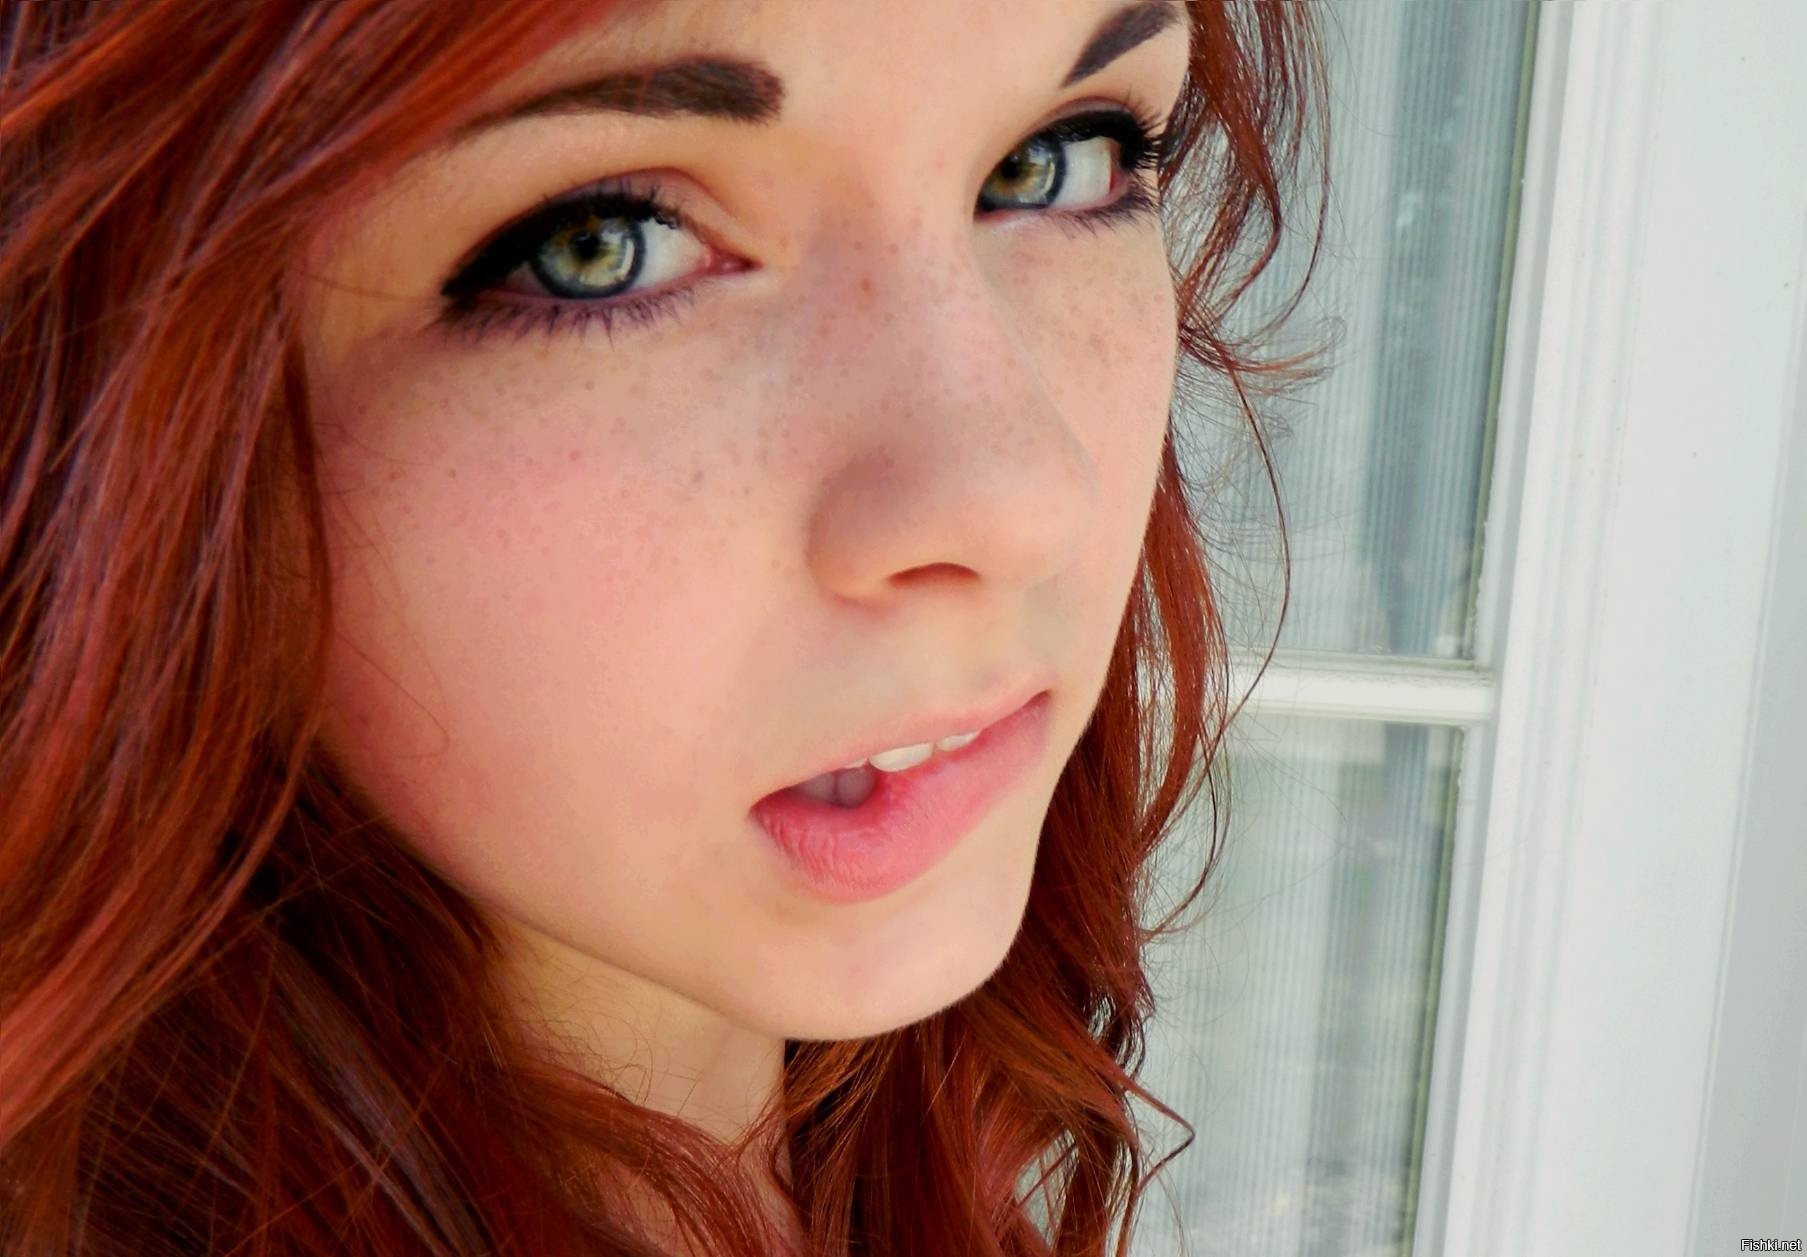 Pretty eyed redhead gives eager